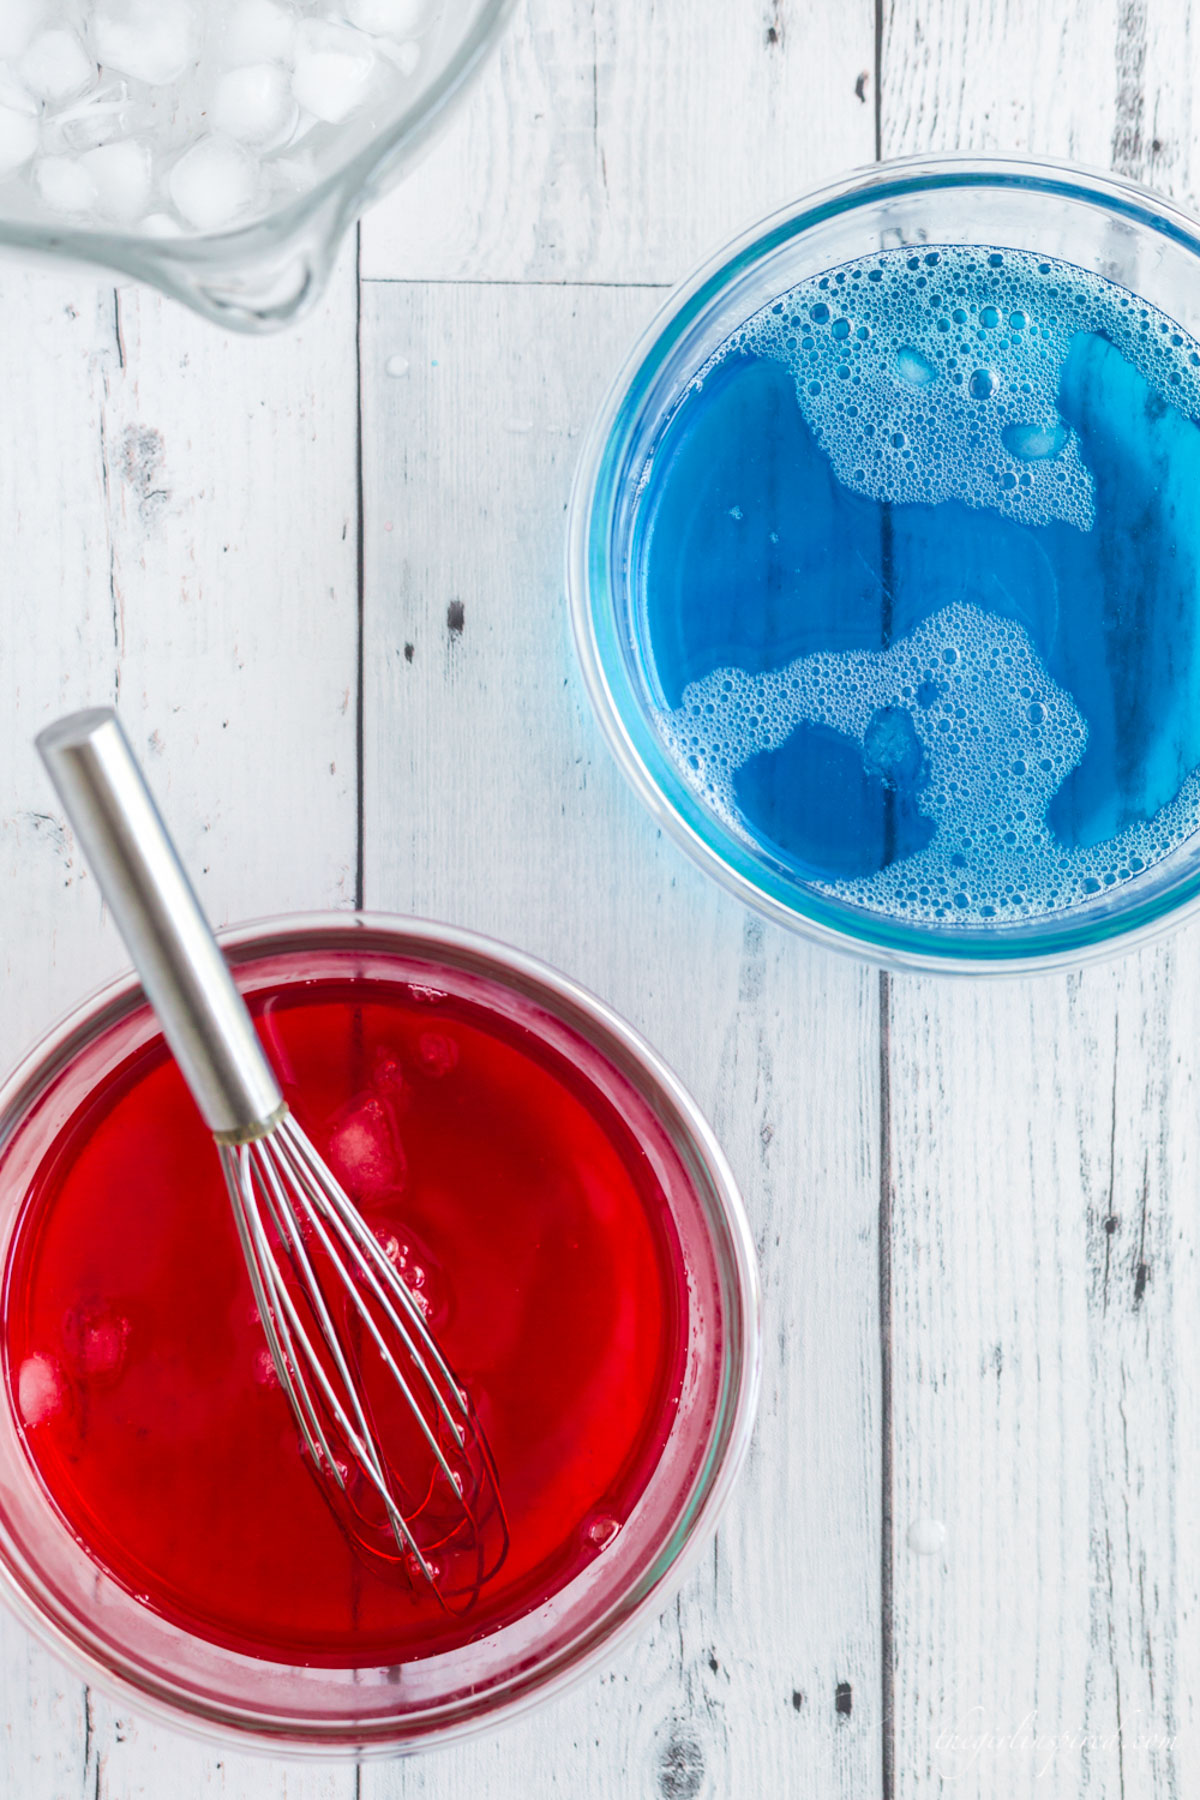 Red jello and blue jello liquid in glass bowls with whisk. Ice in bowls.